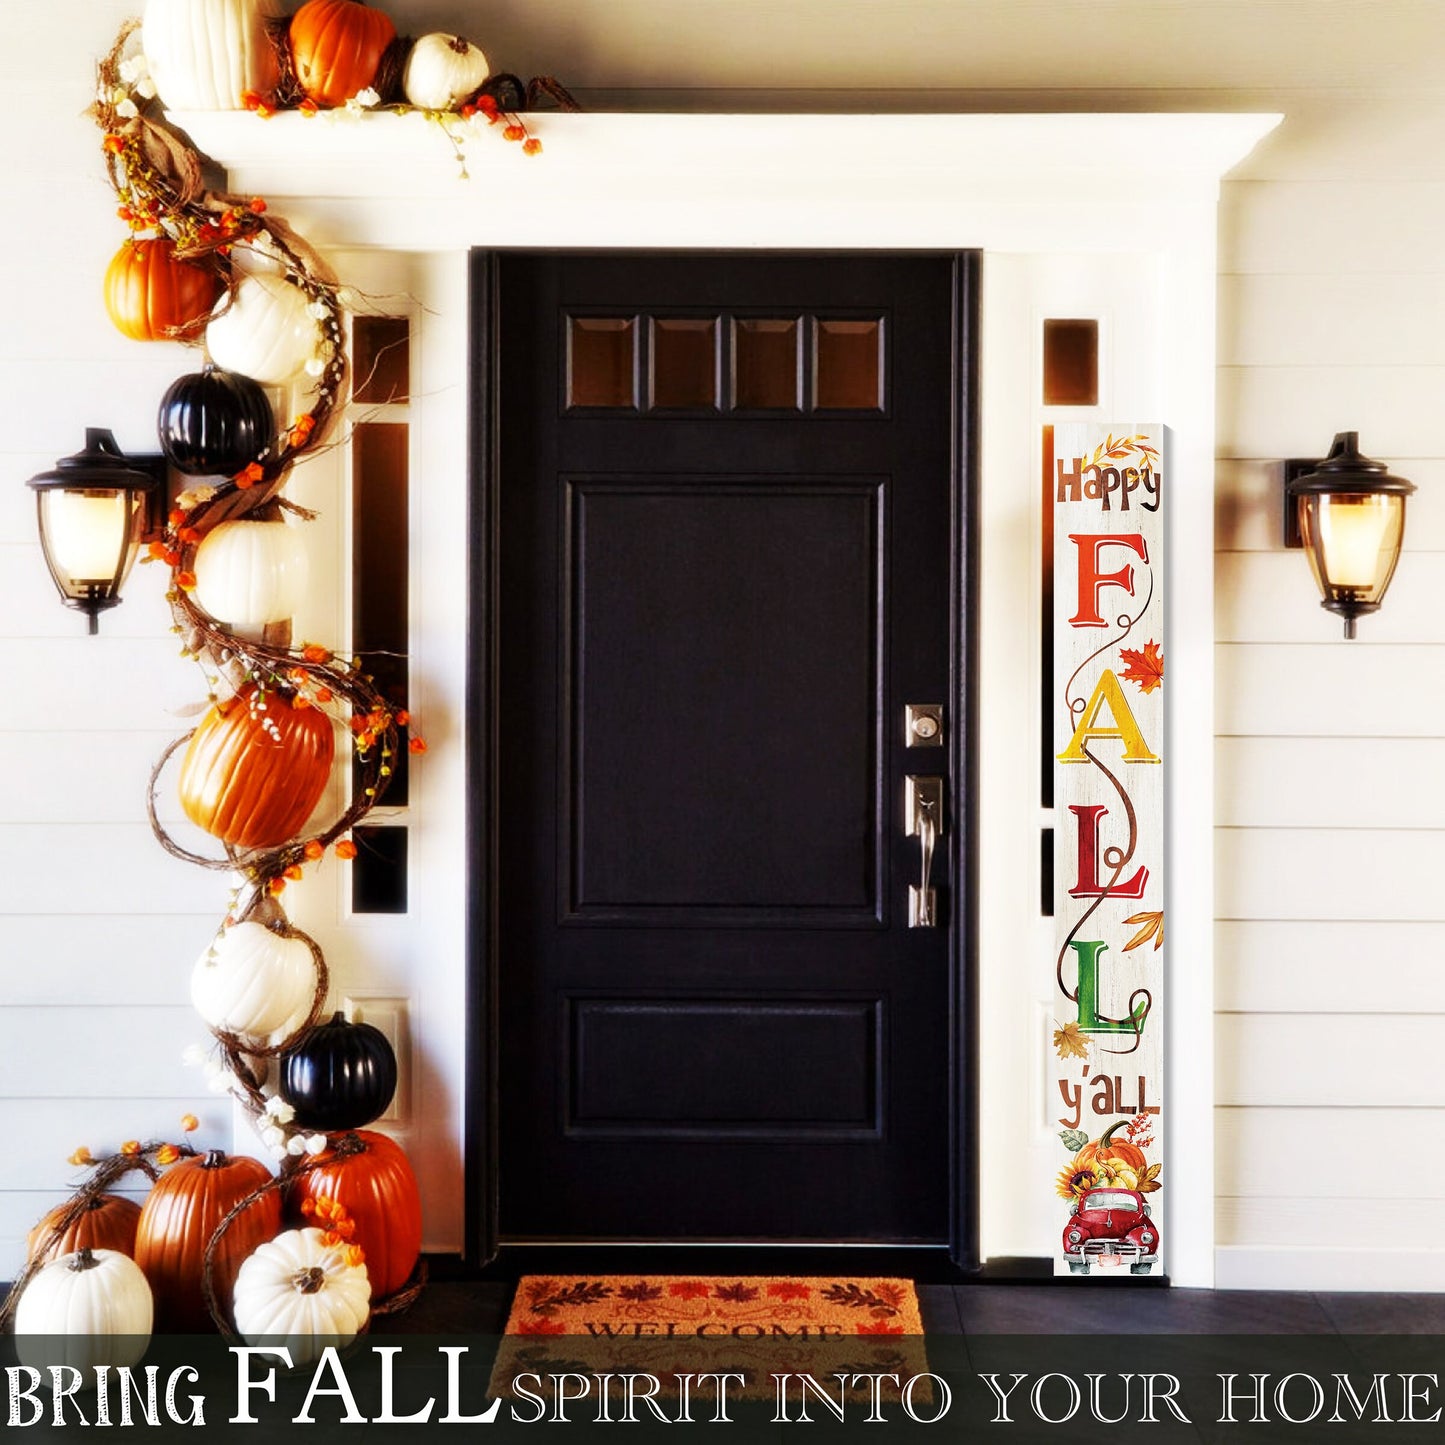 72-Inch Wooden "Happy Fall Y'all" Porch Sign - Seasonal Front Door Decor for Autumn Celebrations